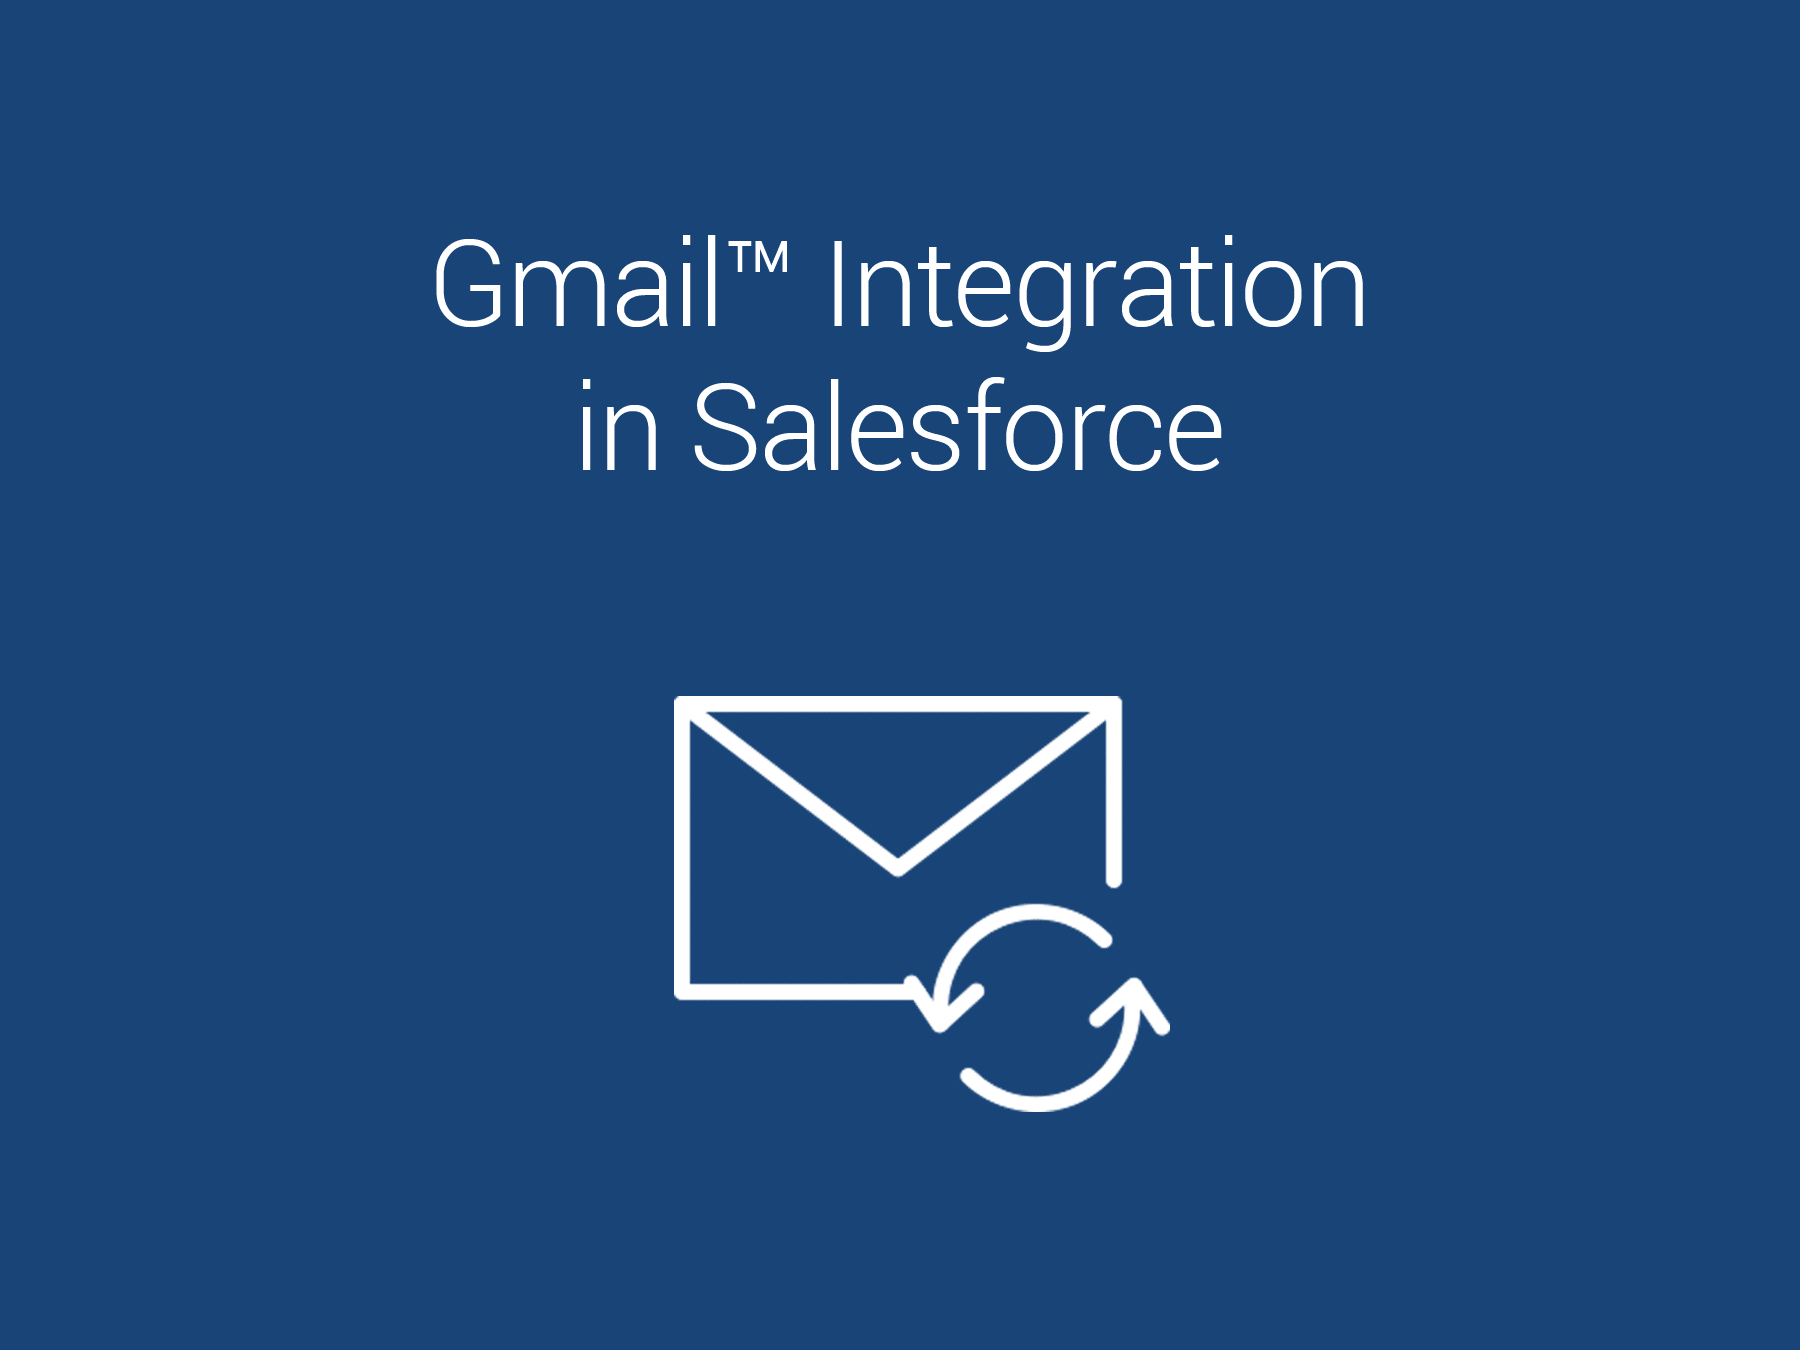 Gmail™ Integration in Salesforce